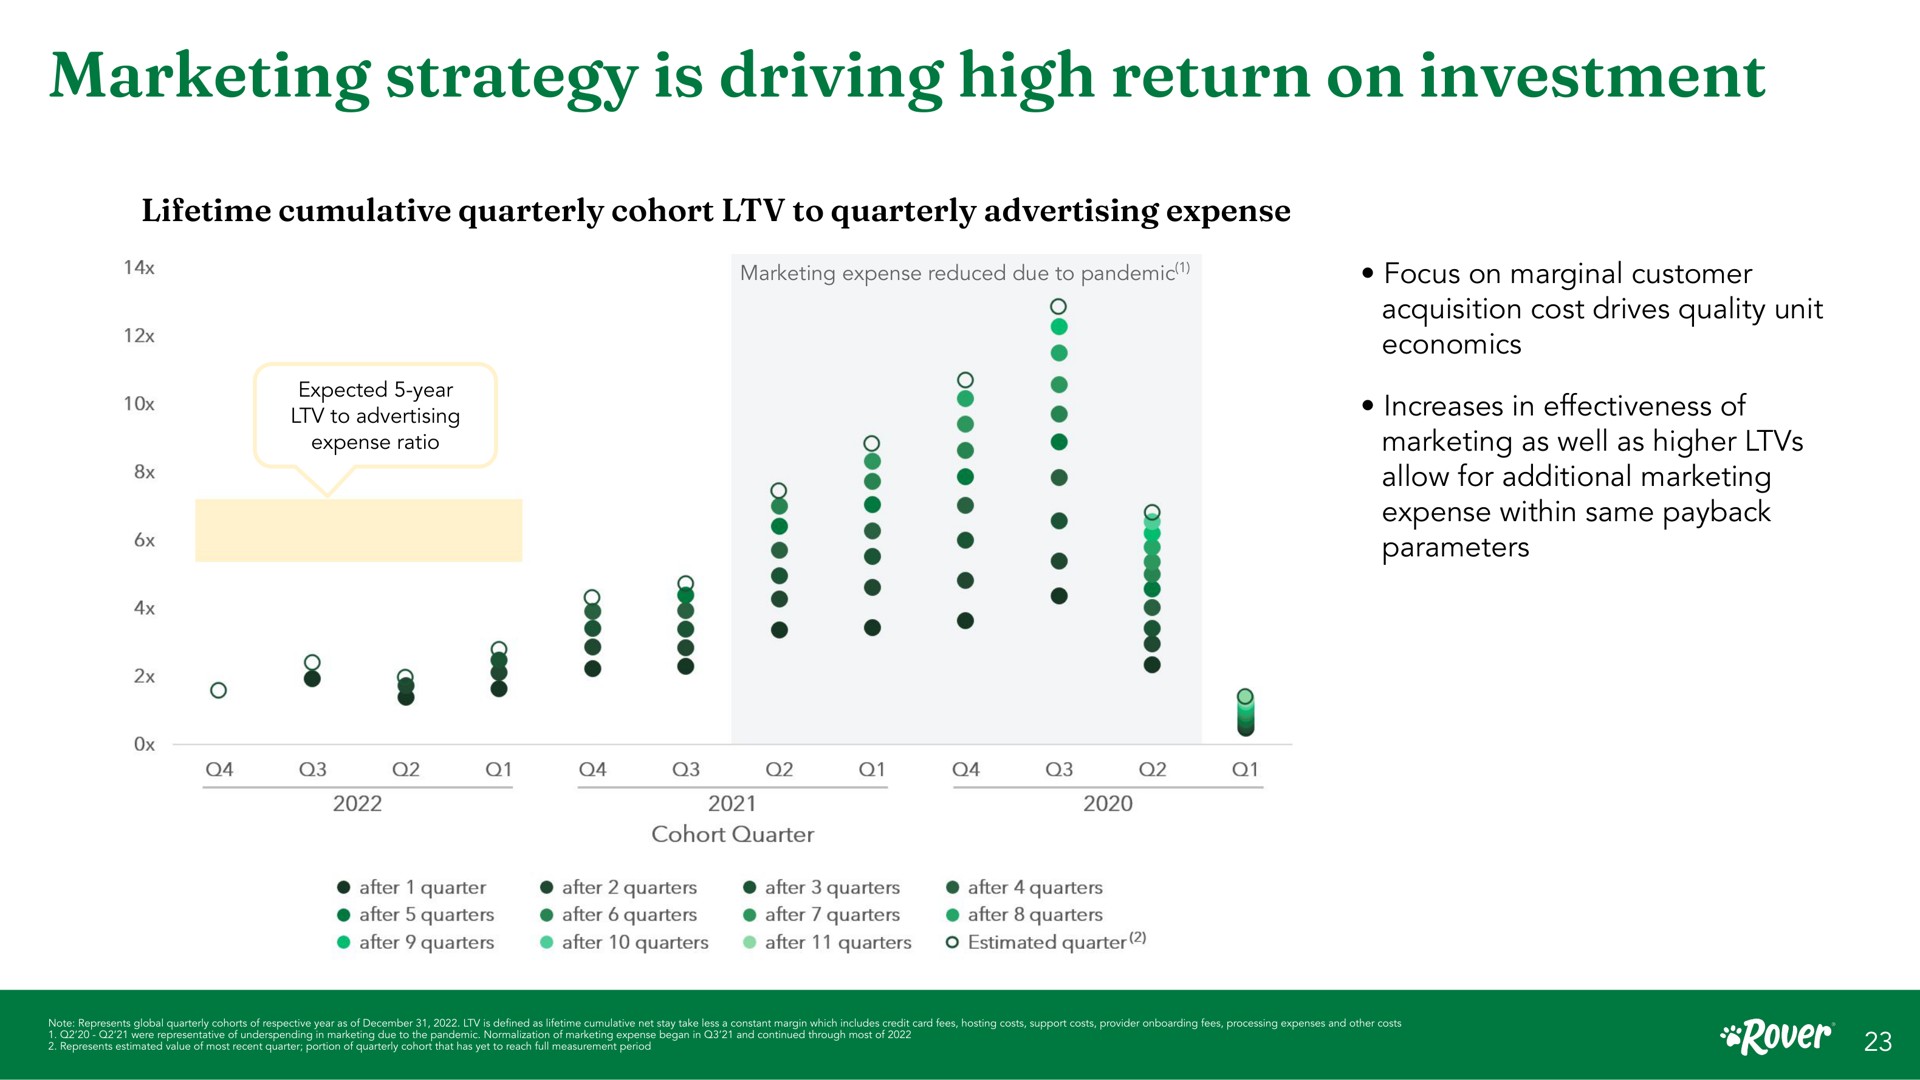 marketing strategy is driving high return on investment lifetime cumulative quarterly cohort to quarterly advertising expense expense reduced due to pandemic focus marginal customer acquisition cost drives quality unit economics increases in effectiveness of as well as higher allow for additional expense within same parameters expected year to advertising expense ratio cohort quarter after quarter after quarters after quarters after quarters after quarters after quarters after quarters after quarters after quarters after quarters after quarters estimated quarter ere ser ere tee ting due to the pan ere margin which includes credit card fees note represents soy through most of global | Rover